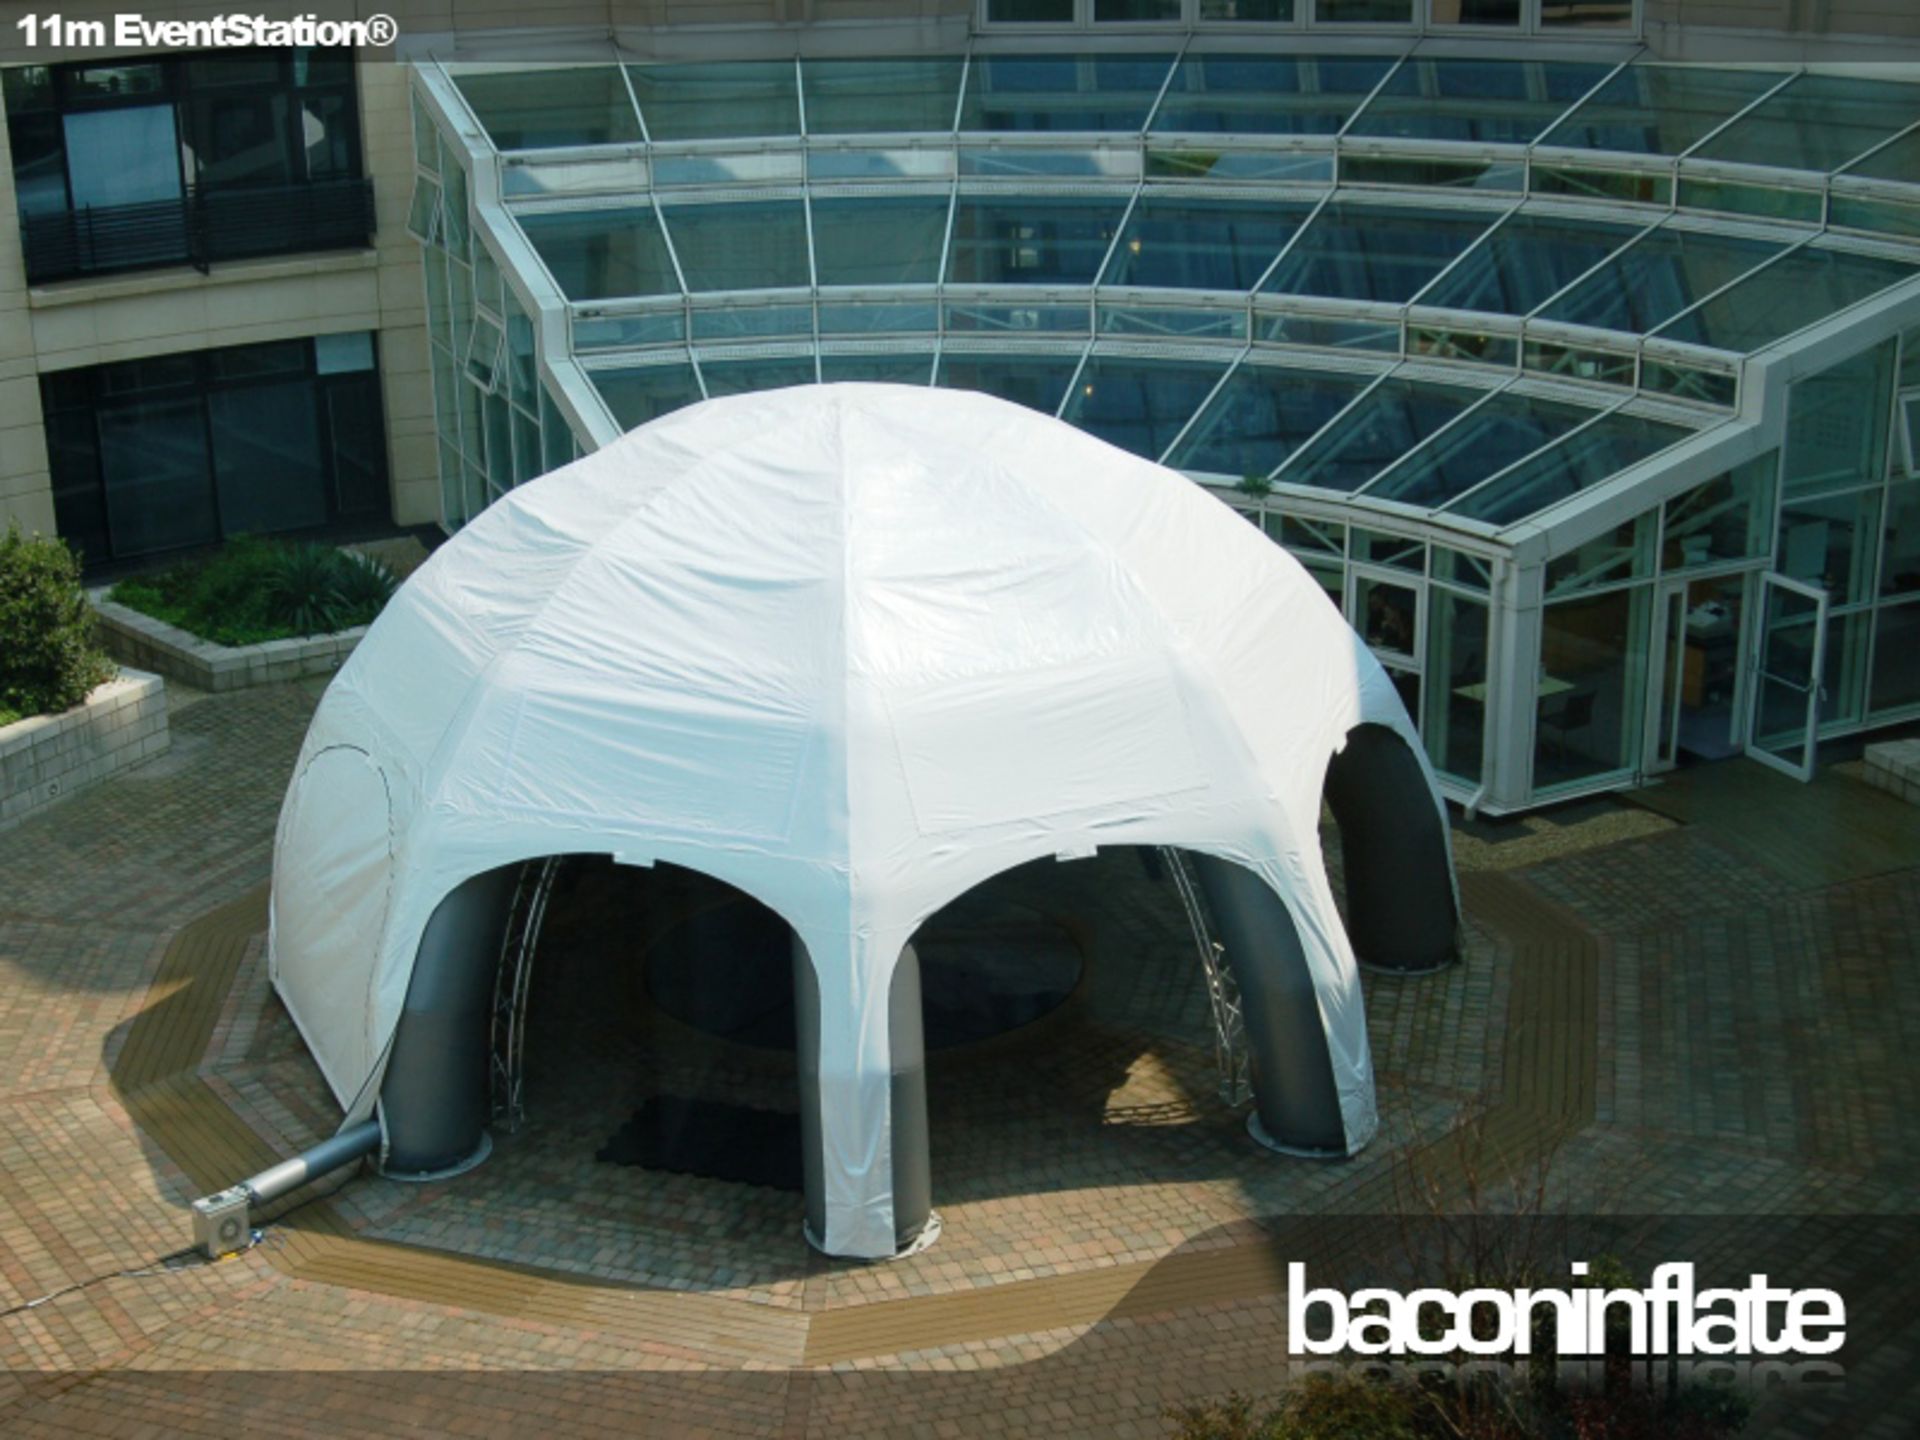 11m EventStation HP (High Pressure) Inflatable Structure with Canopy (2 Bags) (Stock No’s; BiES11/20